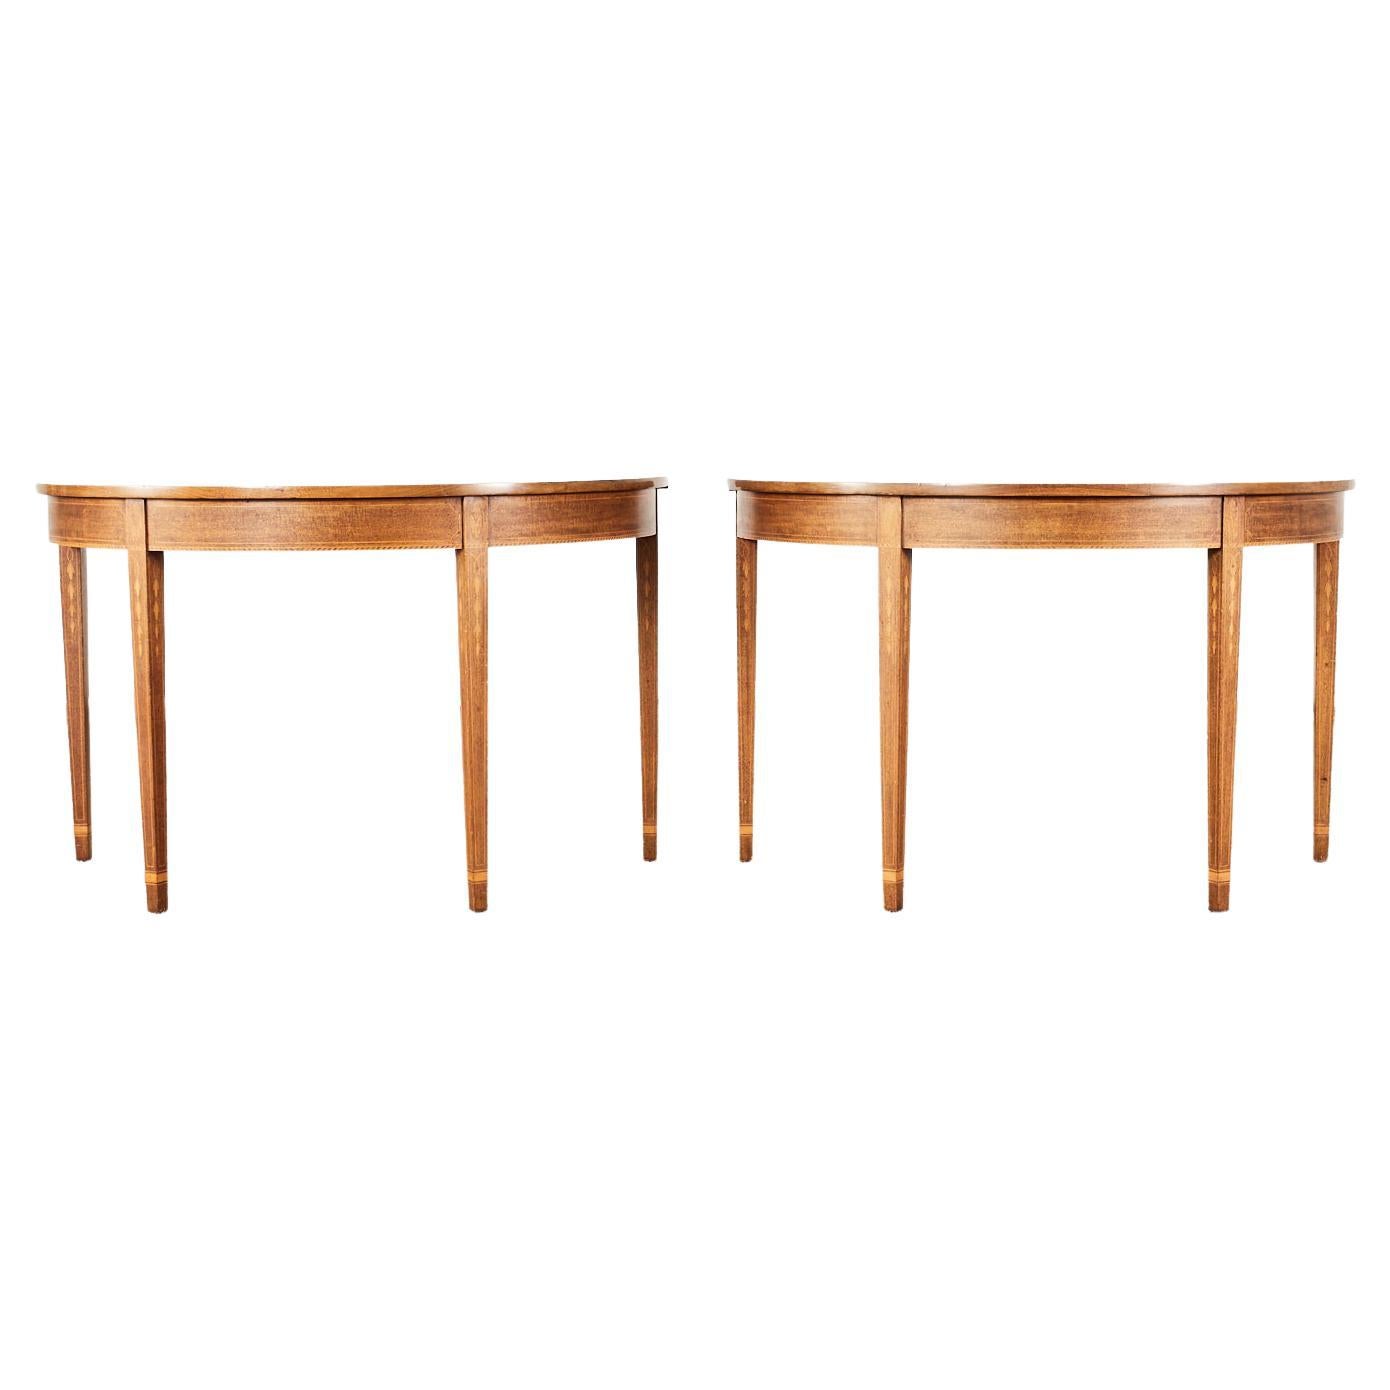 Pair of Hepplewhite Style Mahogany Demilune Console Tables